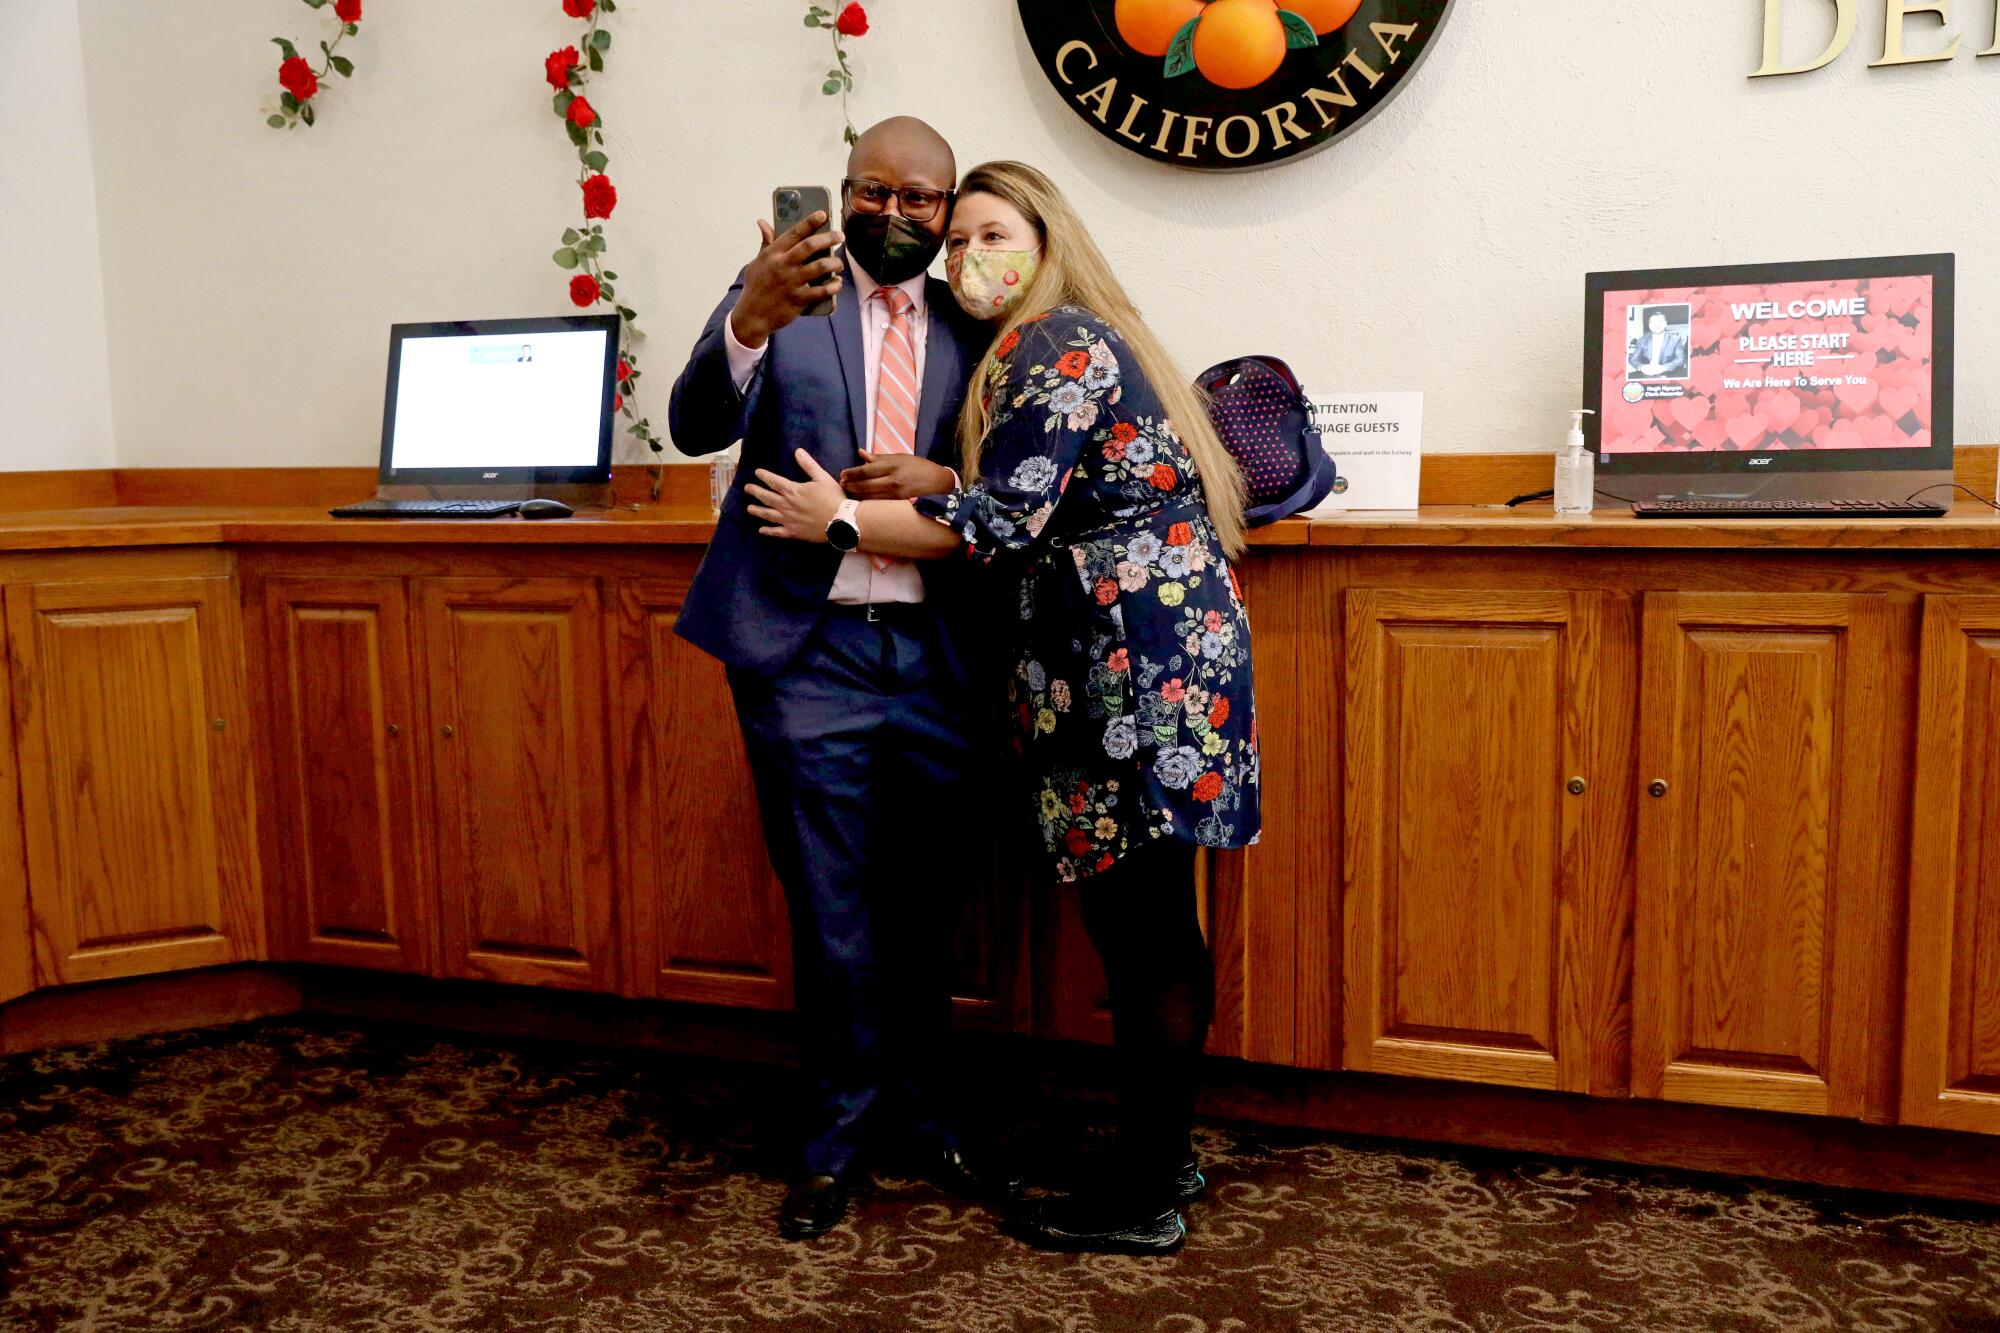 A couple takes a selfie after registering to marry at the courthouse.